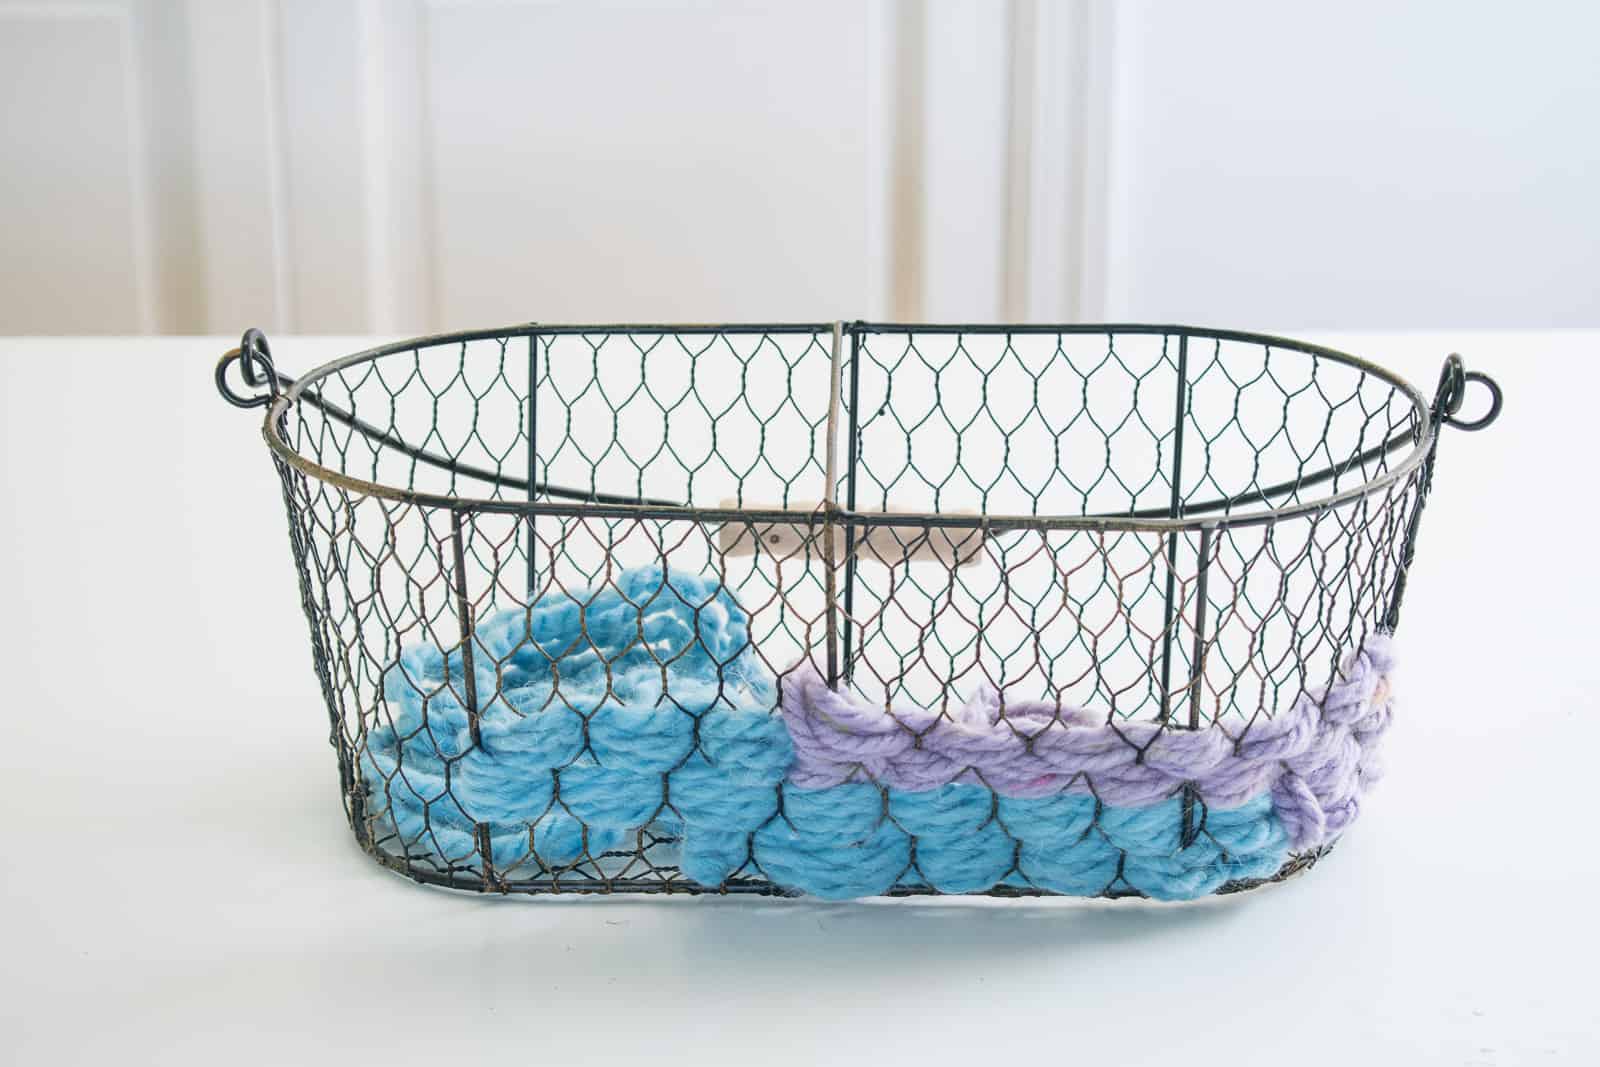 continue weaving the yarn around the basket